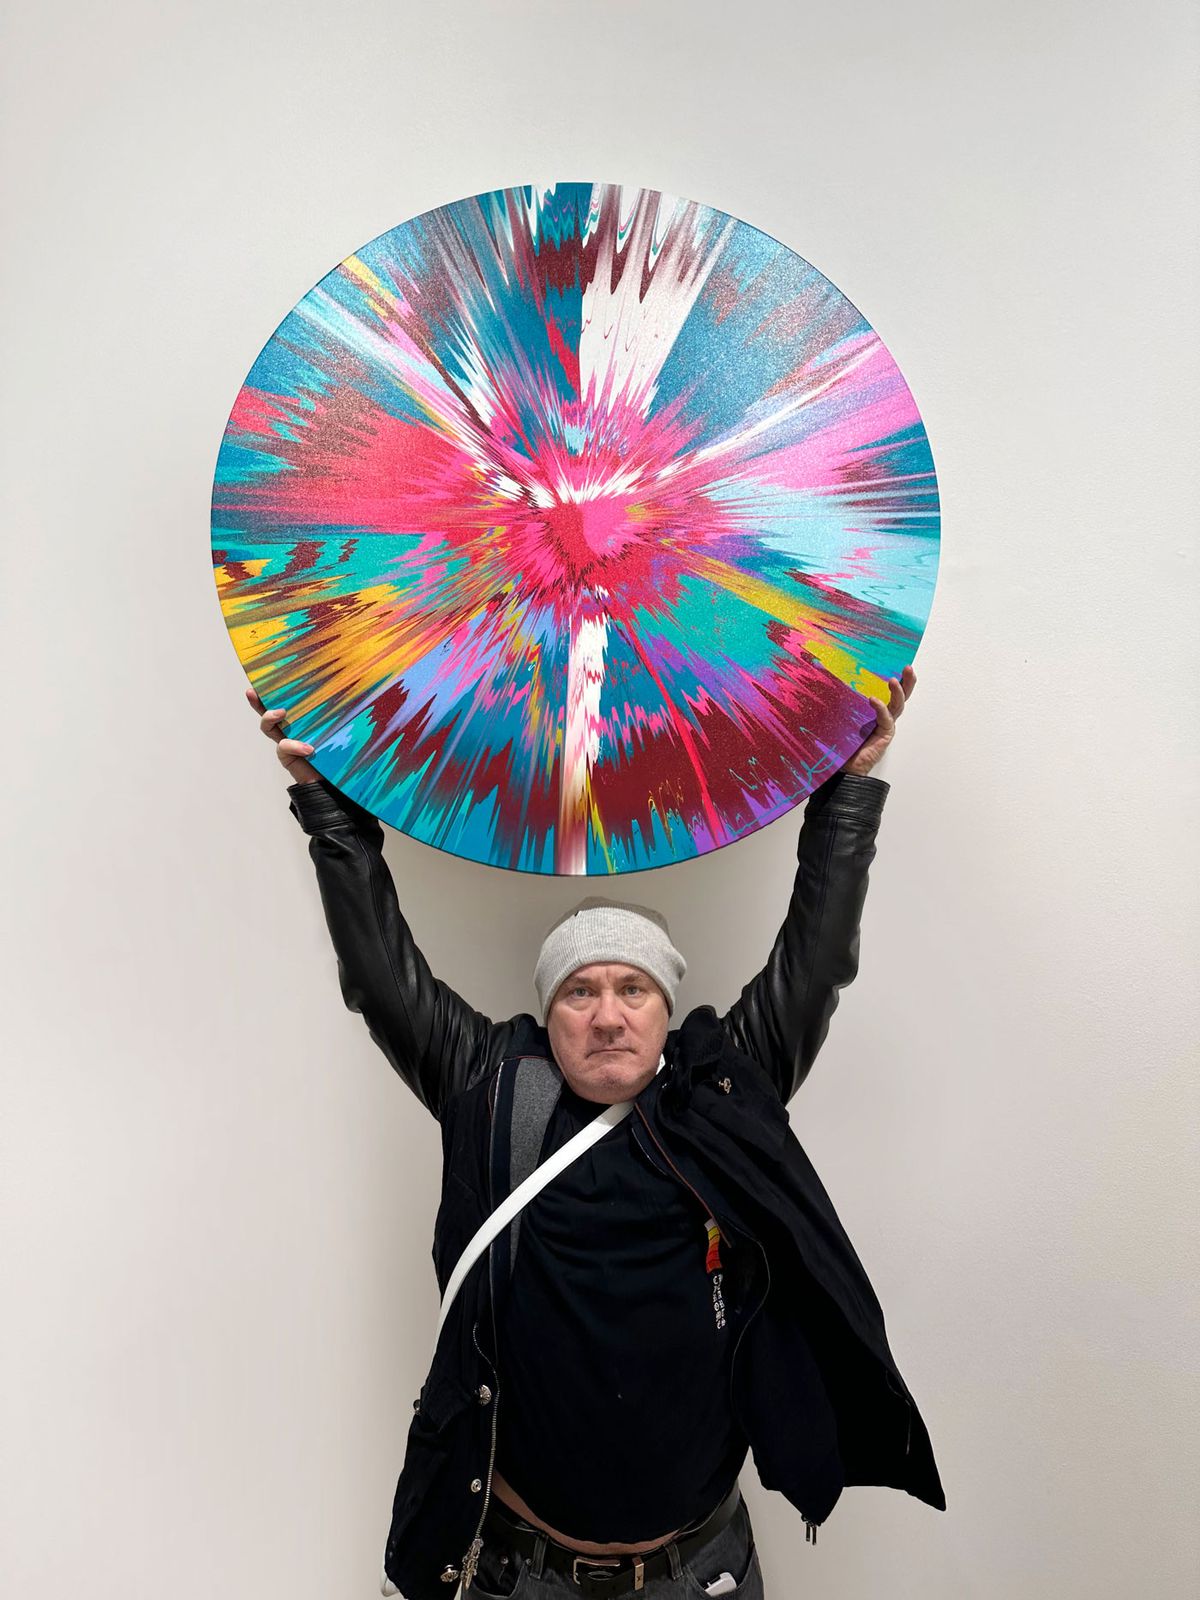 Damien Hirst with one of The Beautiful Paintings Photograph: Prudence Cuming Associates